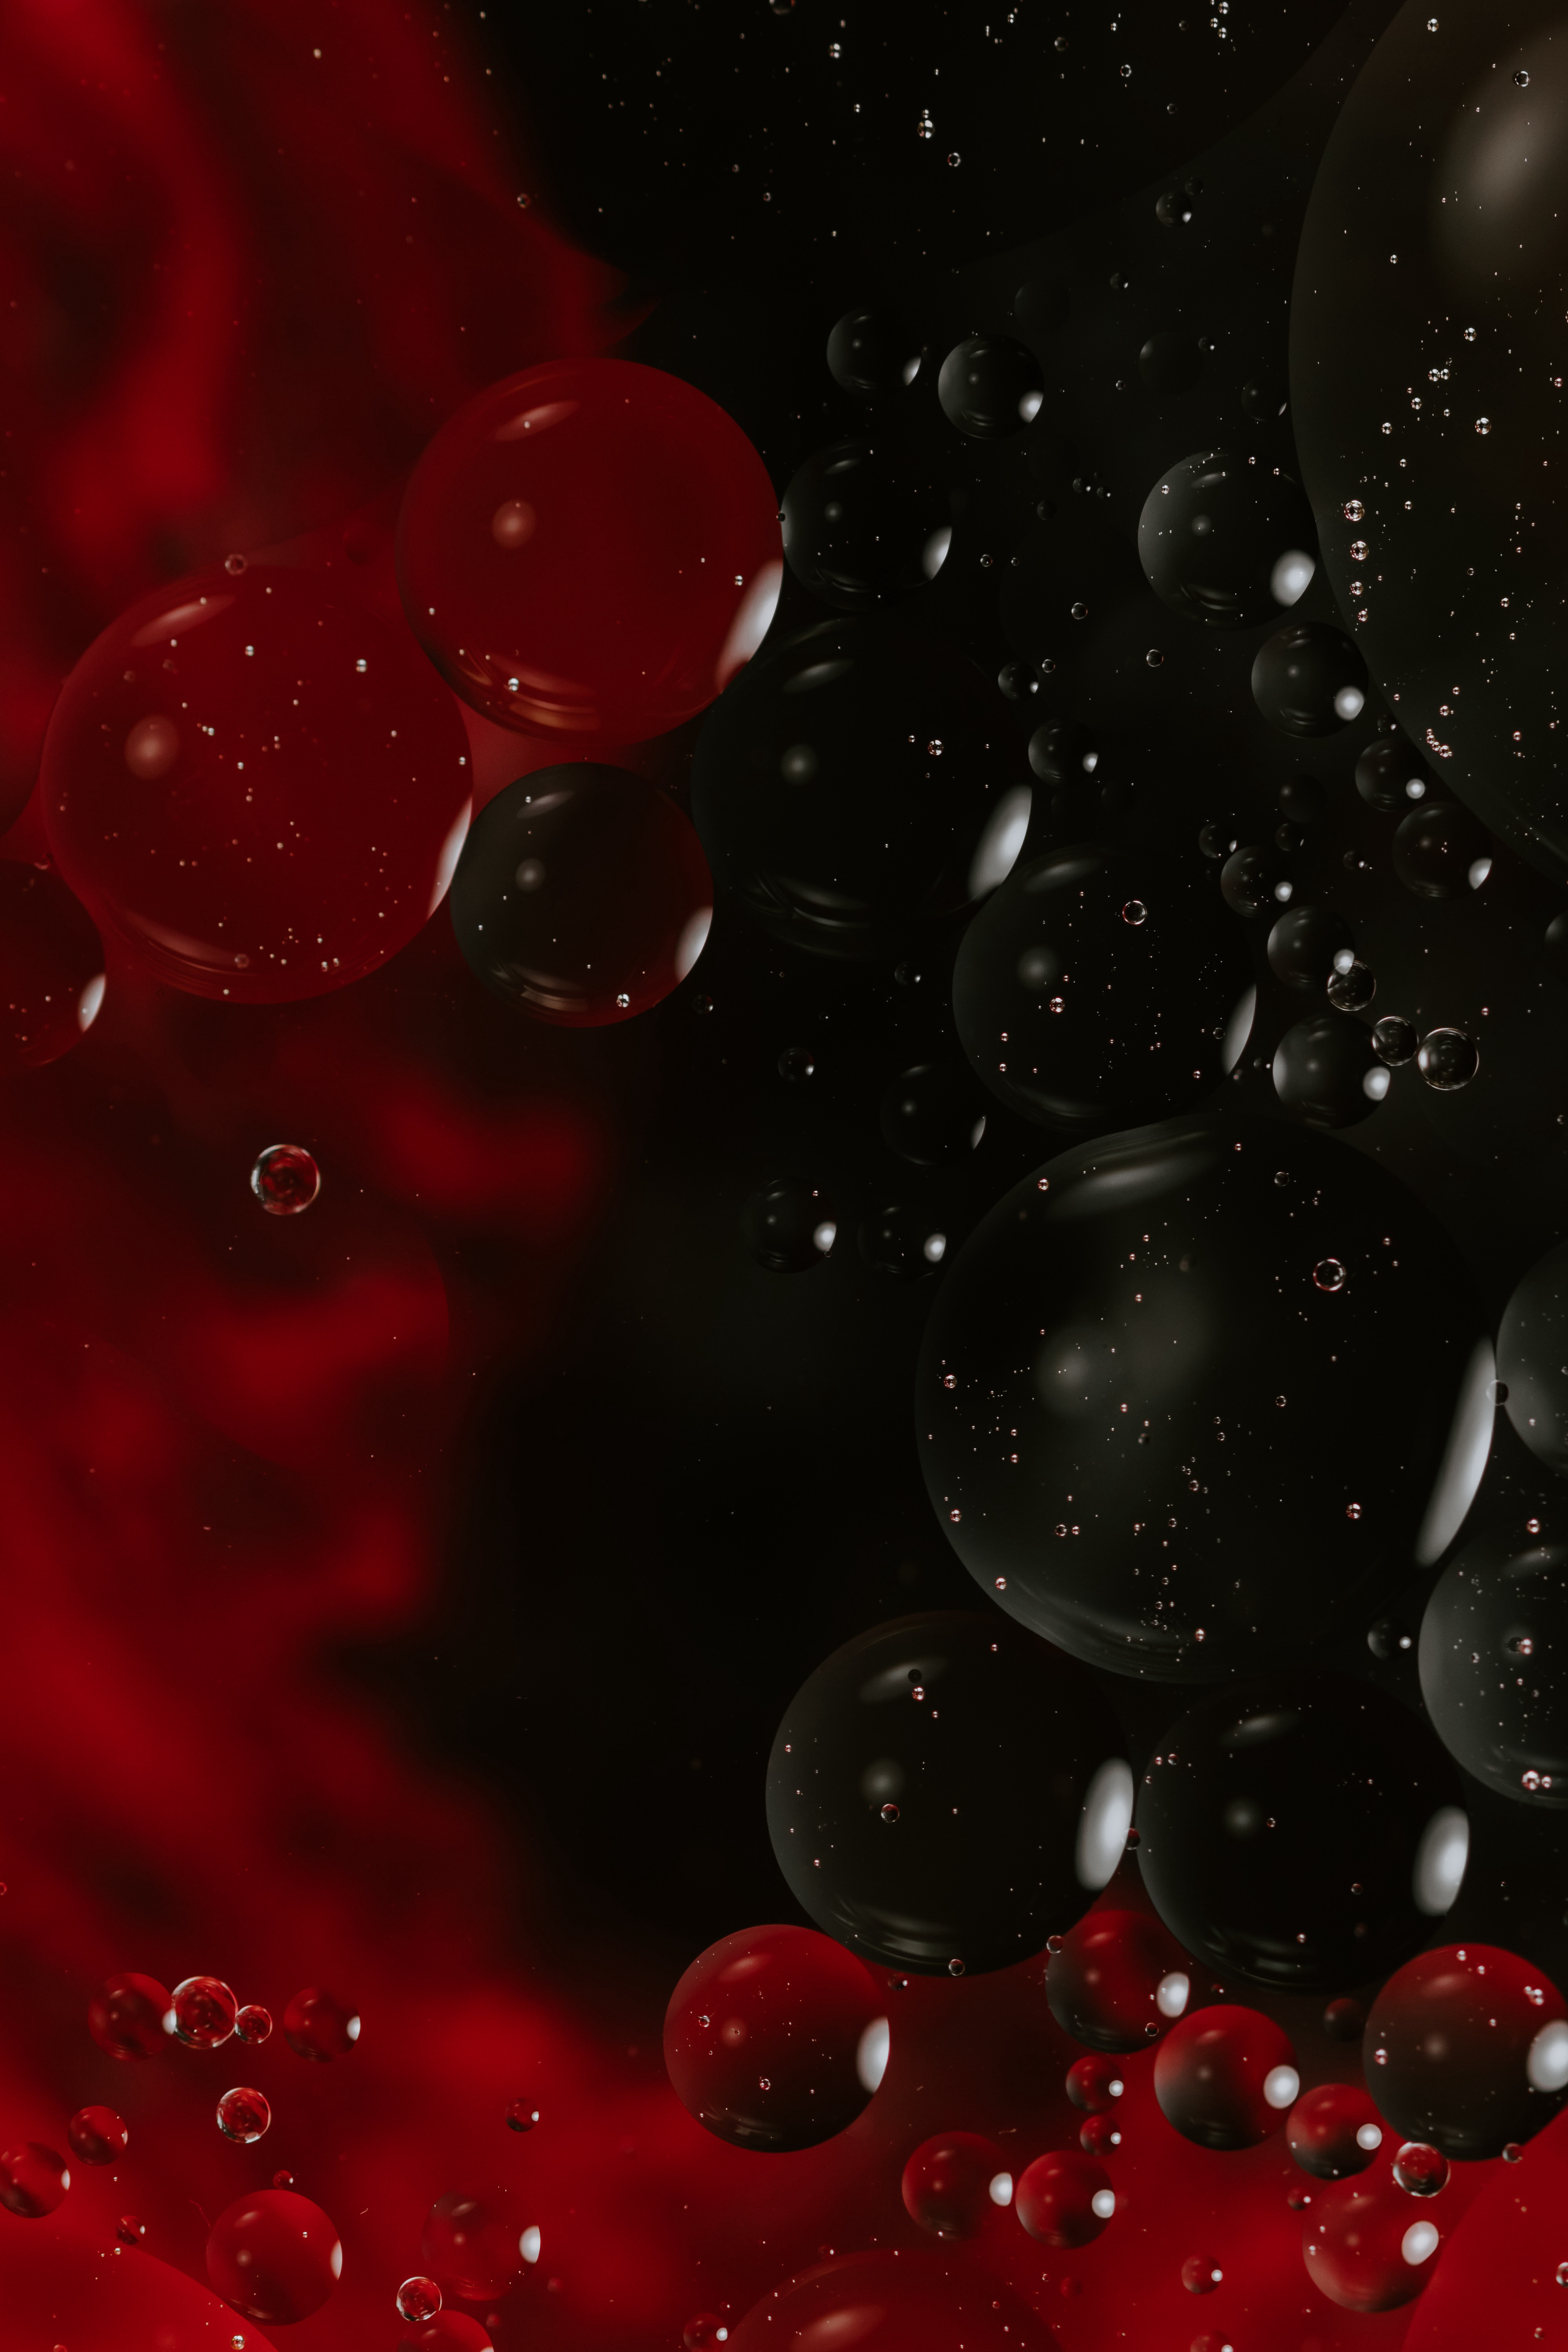 66077 download wallpaper bubbles, macro, texture, liquid screensavers and pictures for free